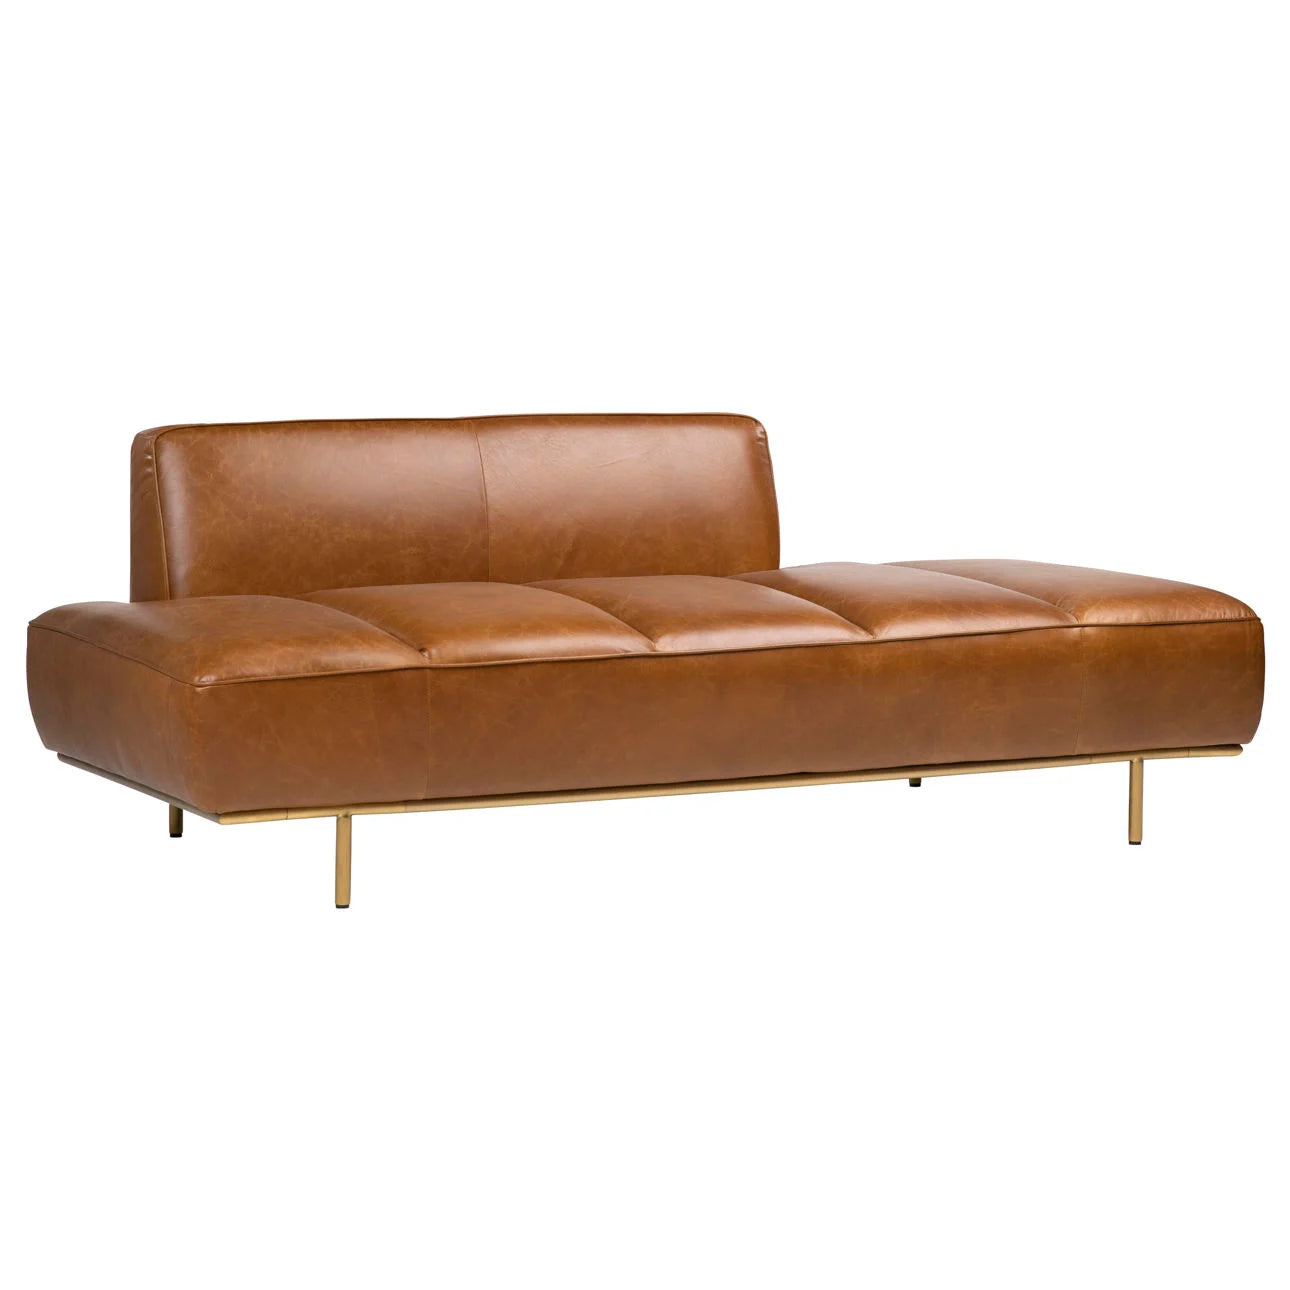 caramel-brown-antiqued-leather-sofa-with-brushed-brass-legs